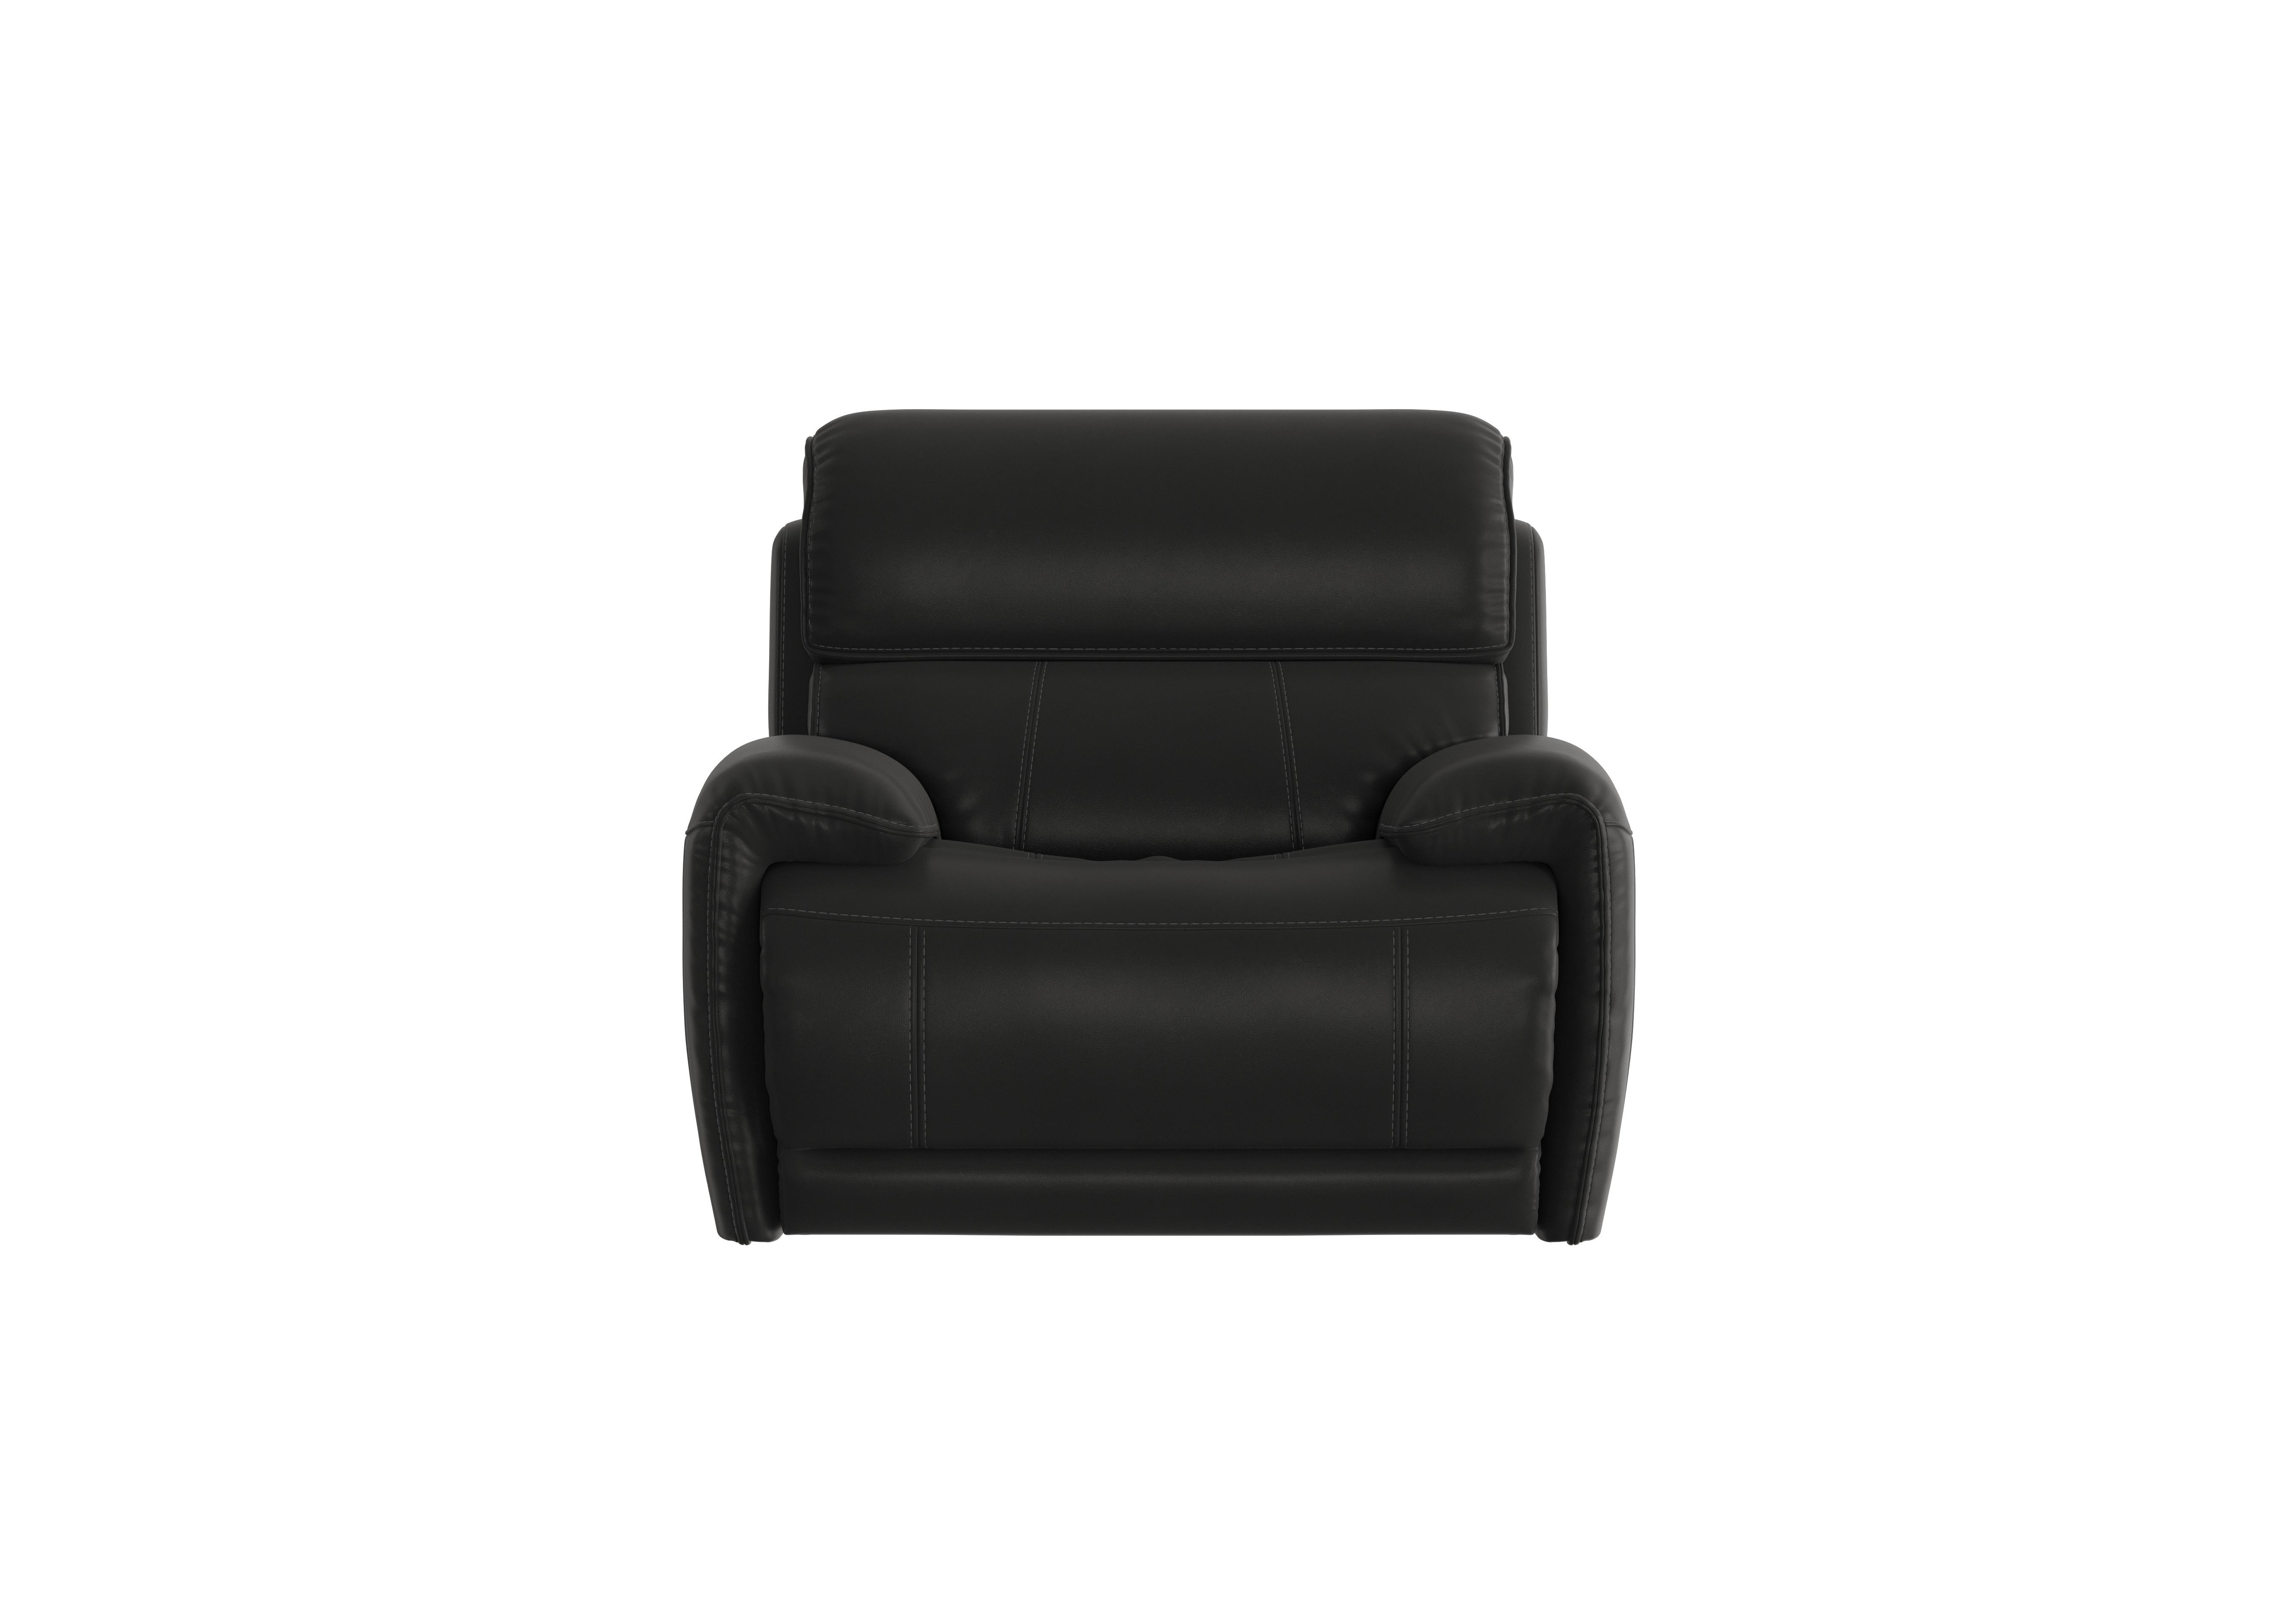 Link Leather Armchair in Bv-3500 Classic Black on Furniture Village